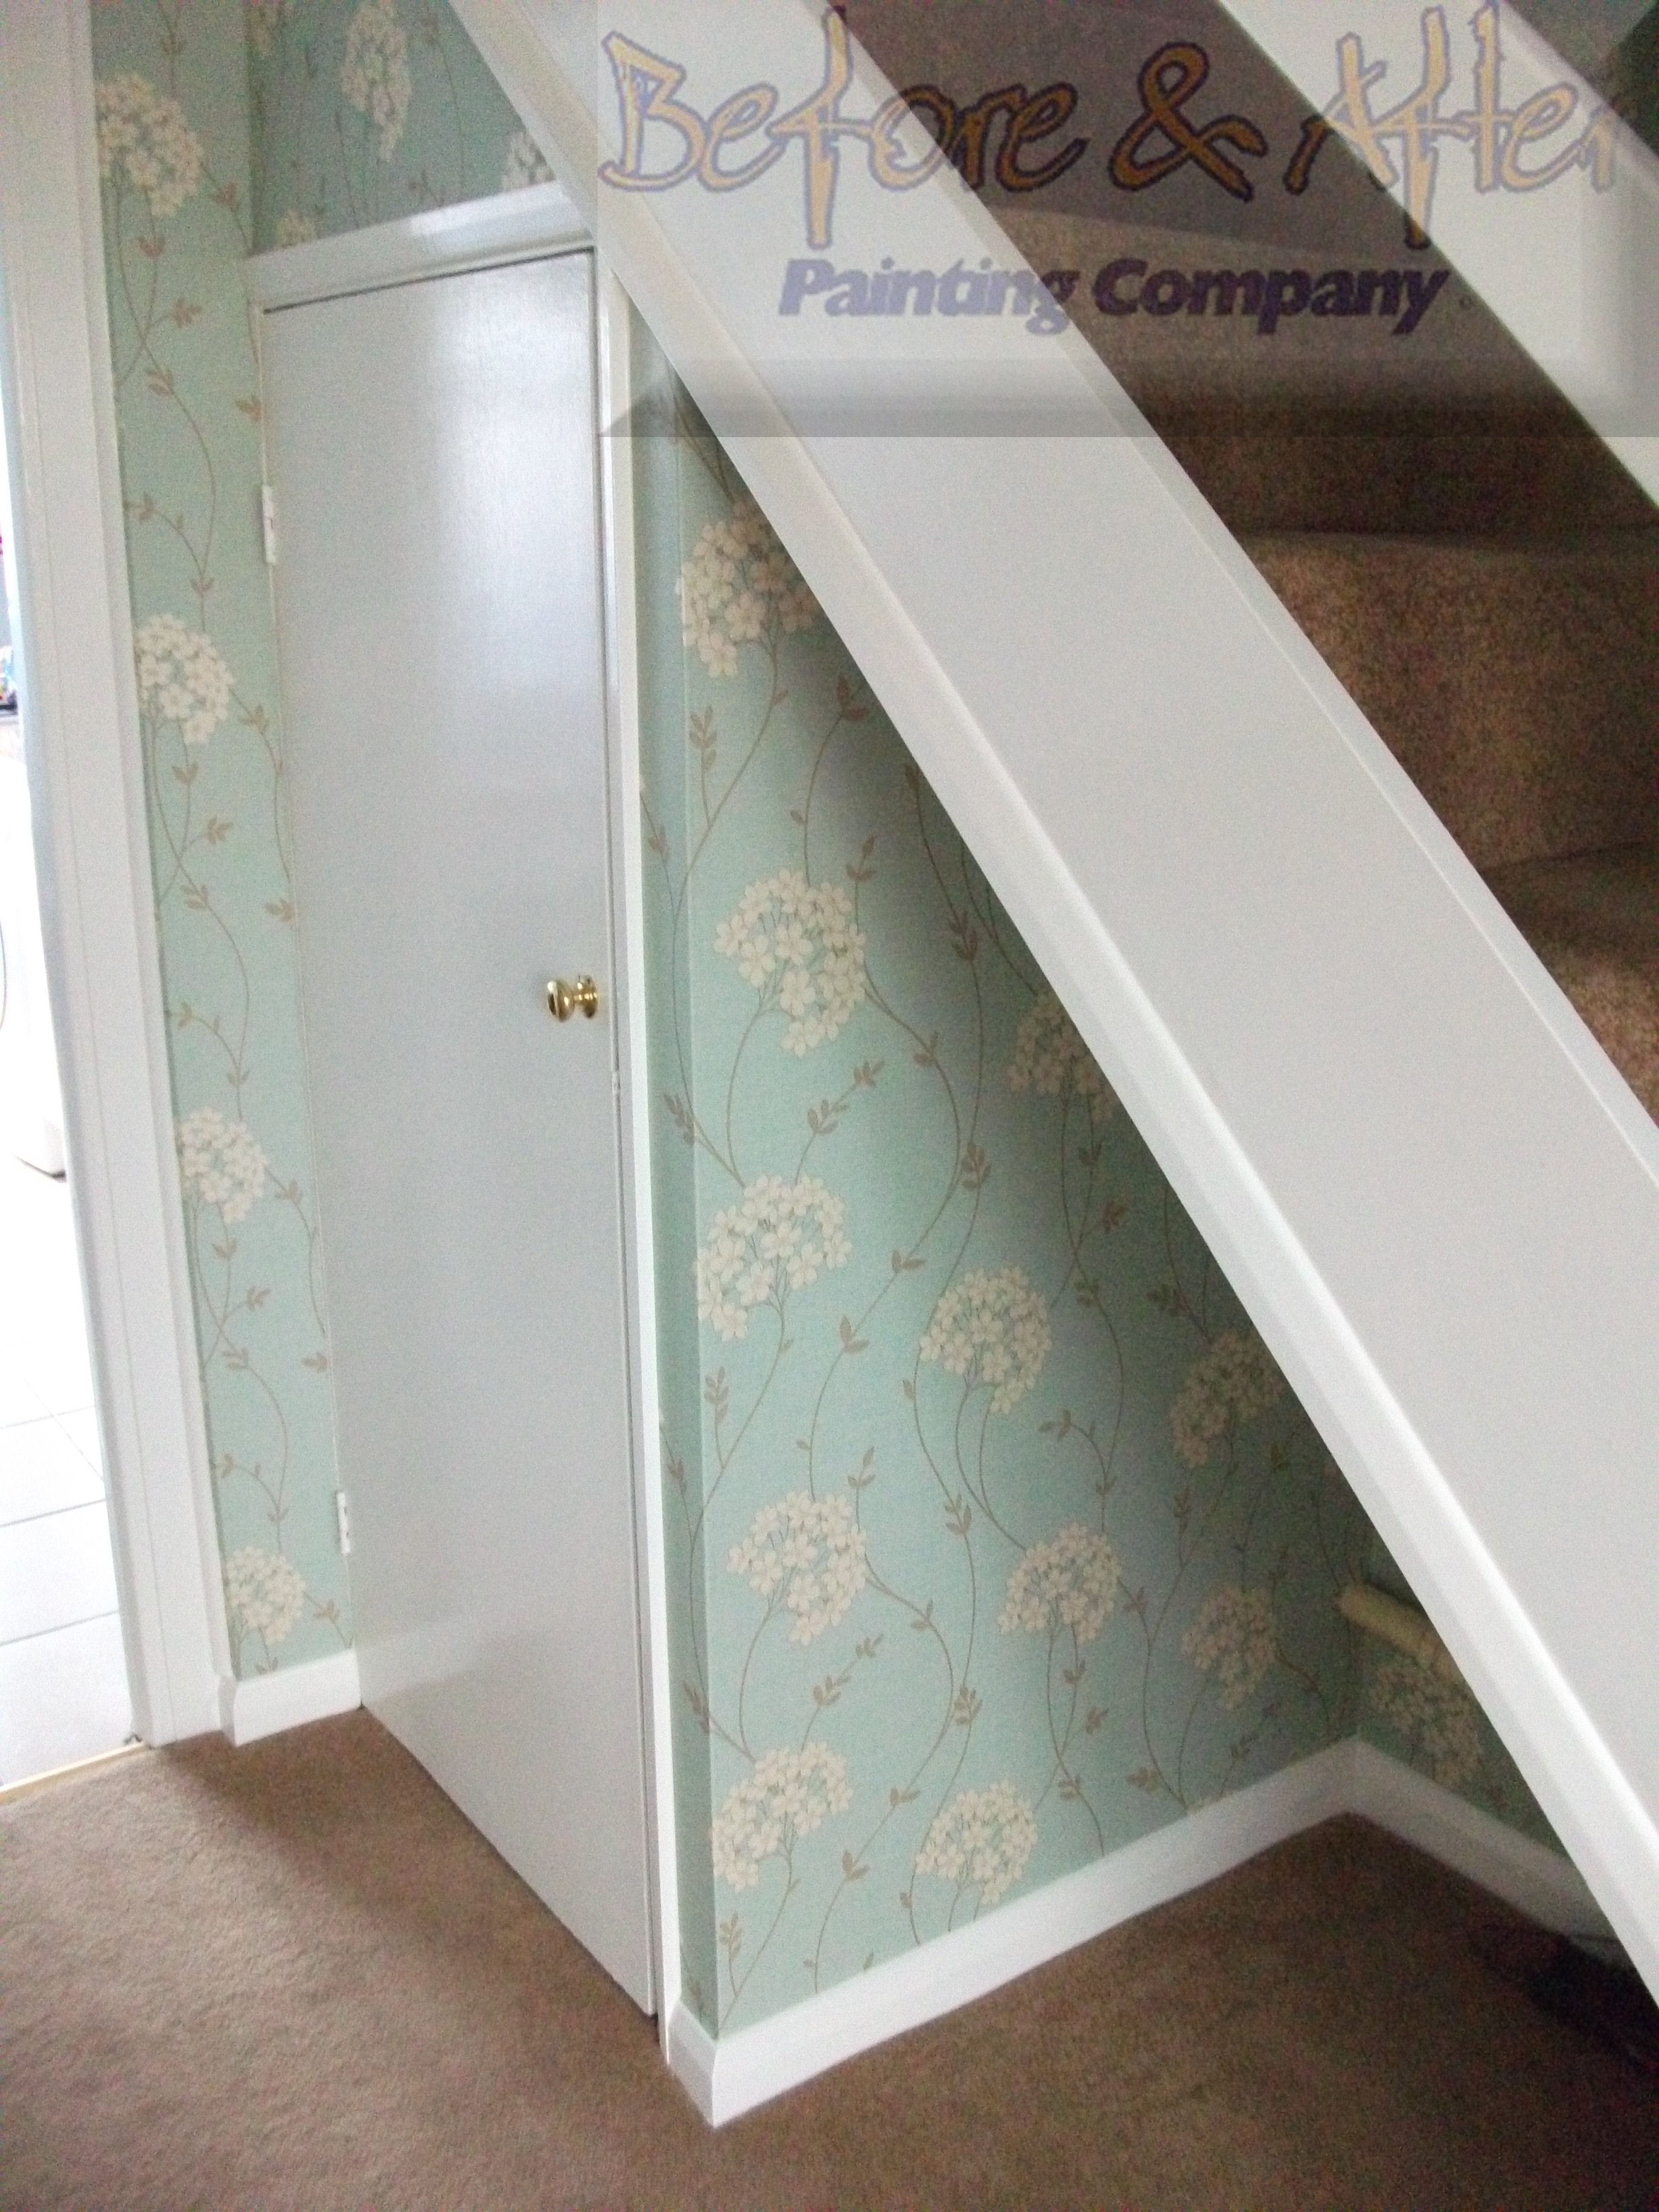 Duck Egg Blue wallpaper from Arthouse in a hall, stairs, landing in a Kent home.